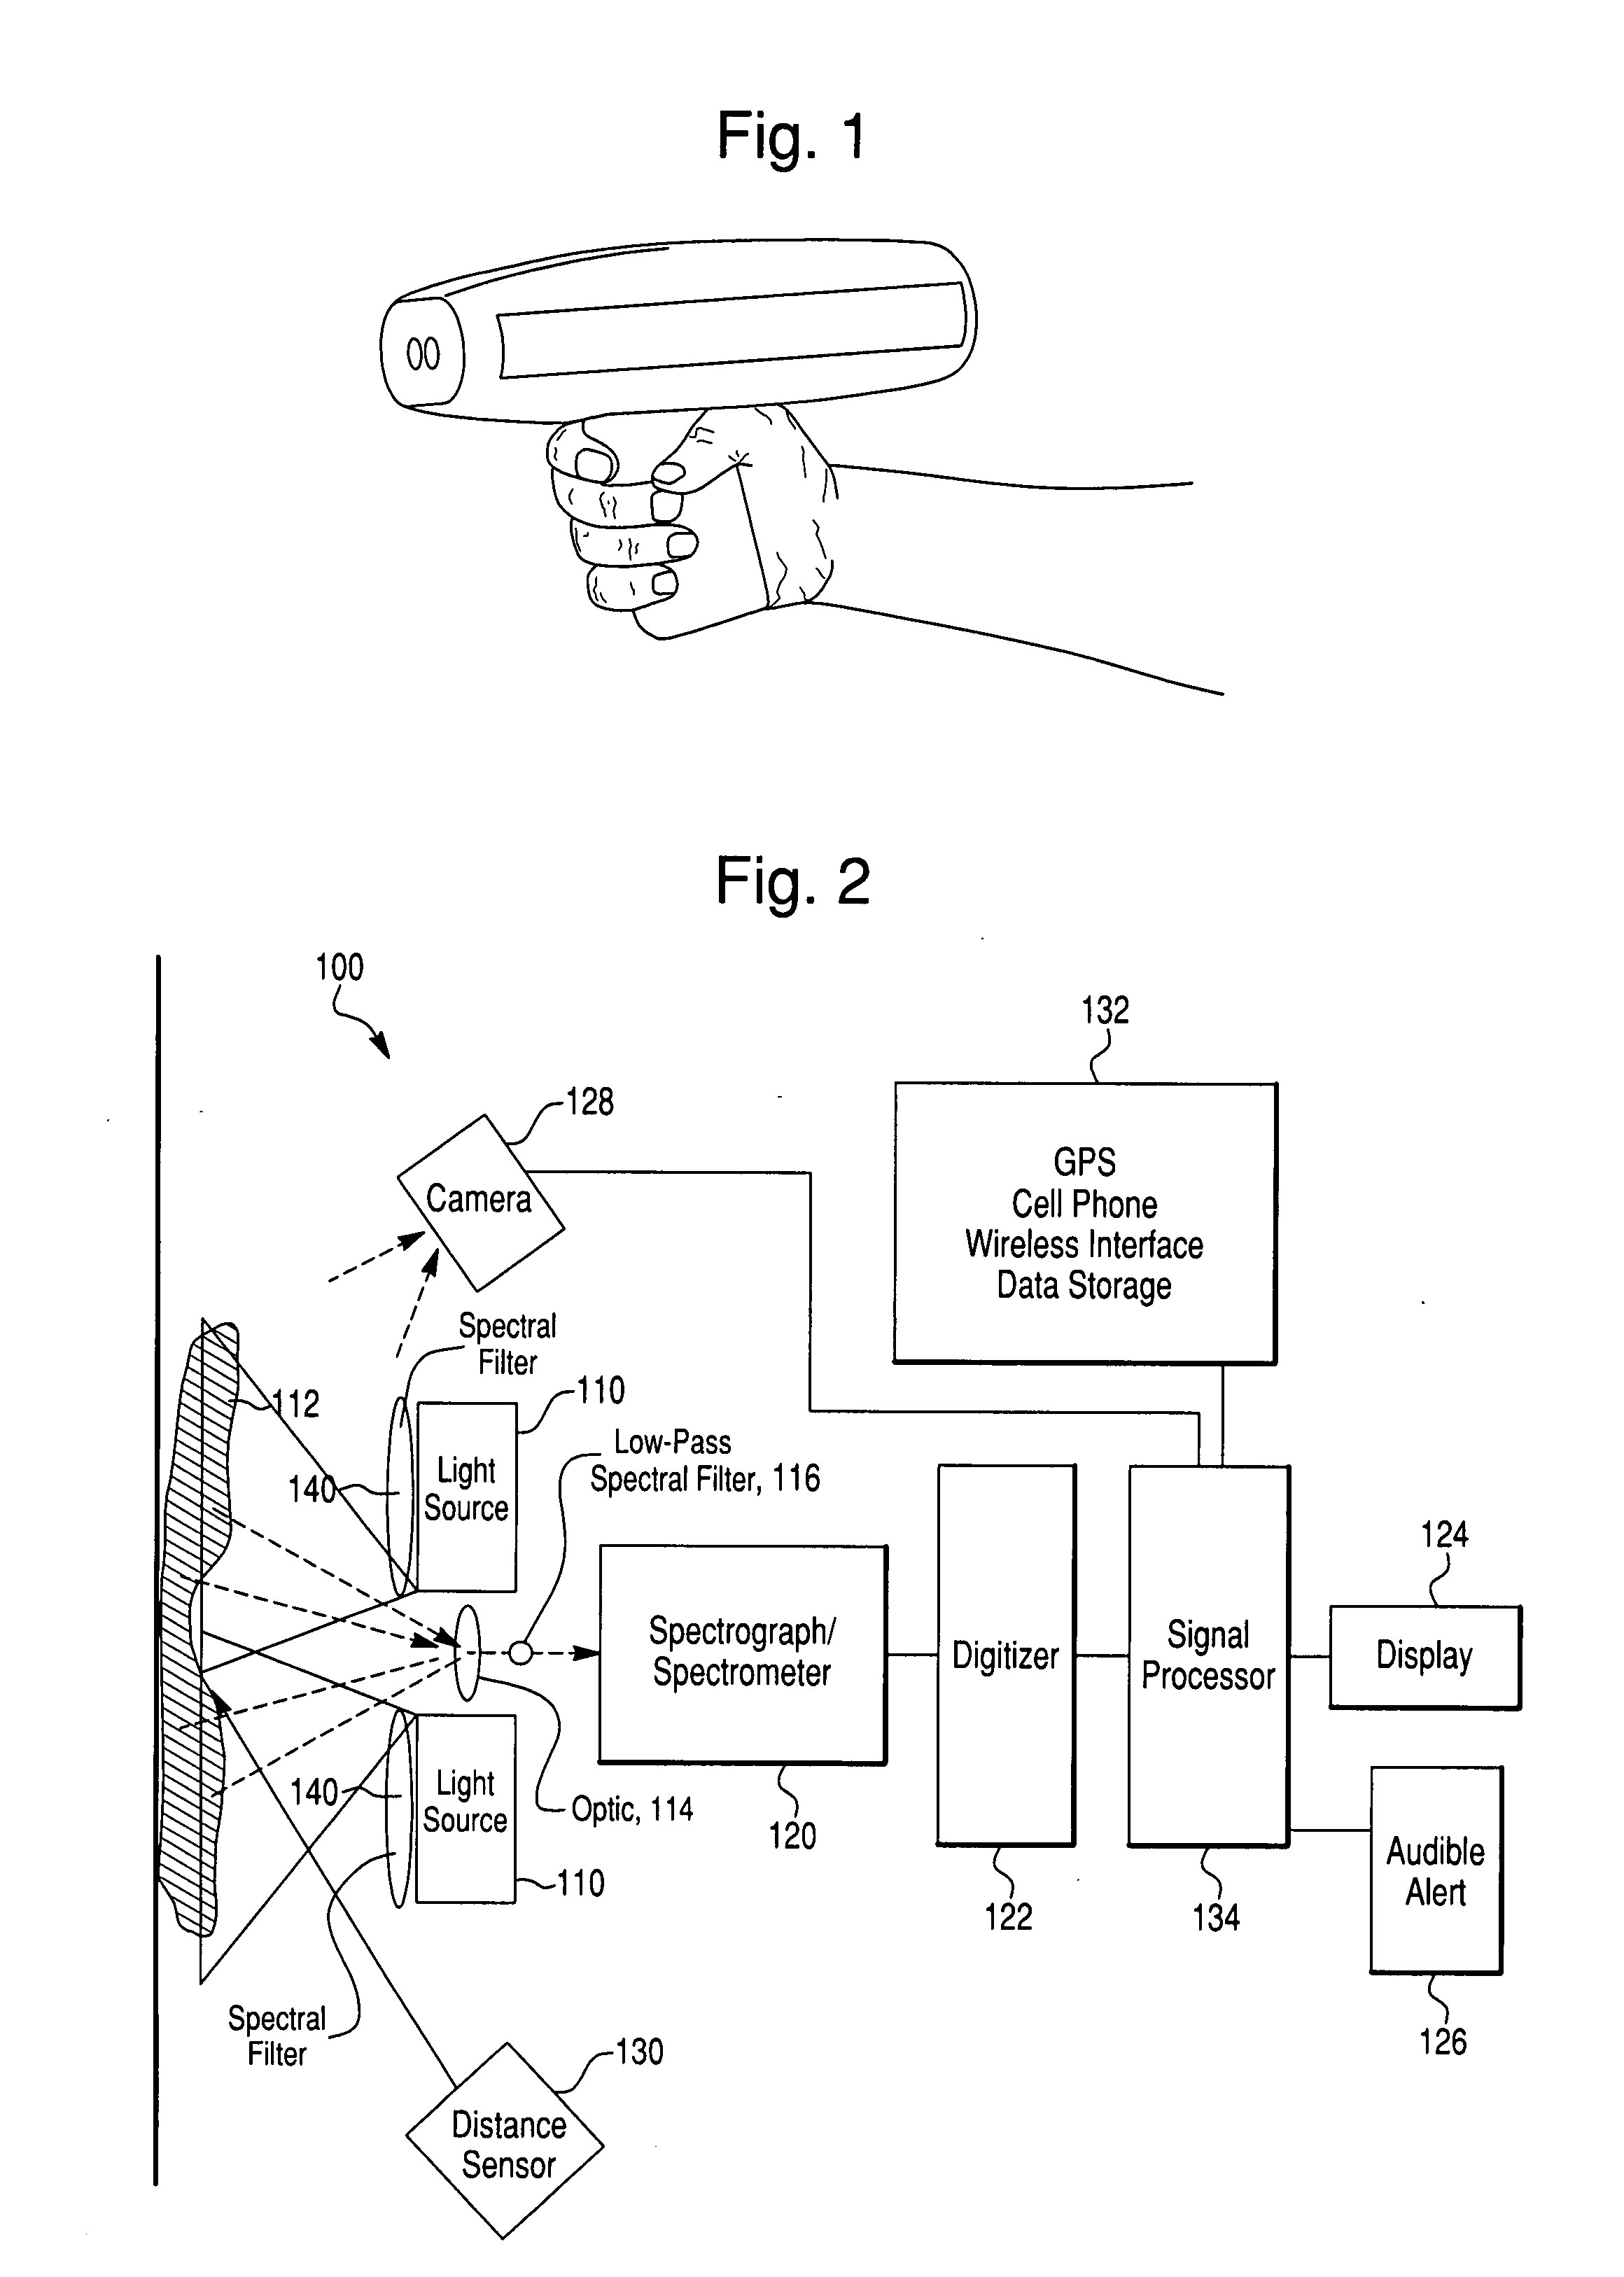 Methods and apparatus for molecular species detection, inspection and classification using ultraviolet to near infrared Enhanced Photoemission Spectroscopy